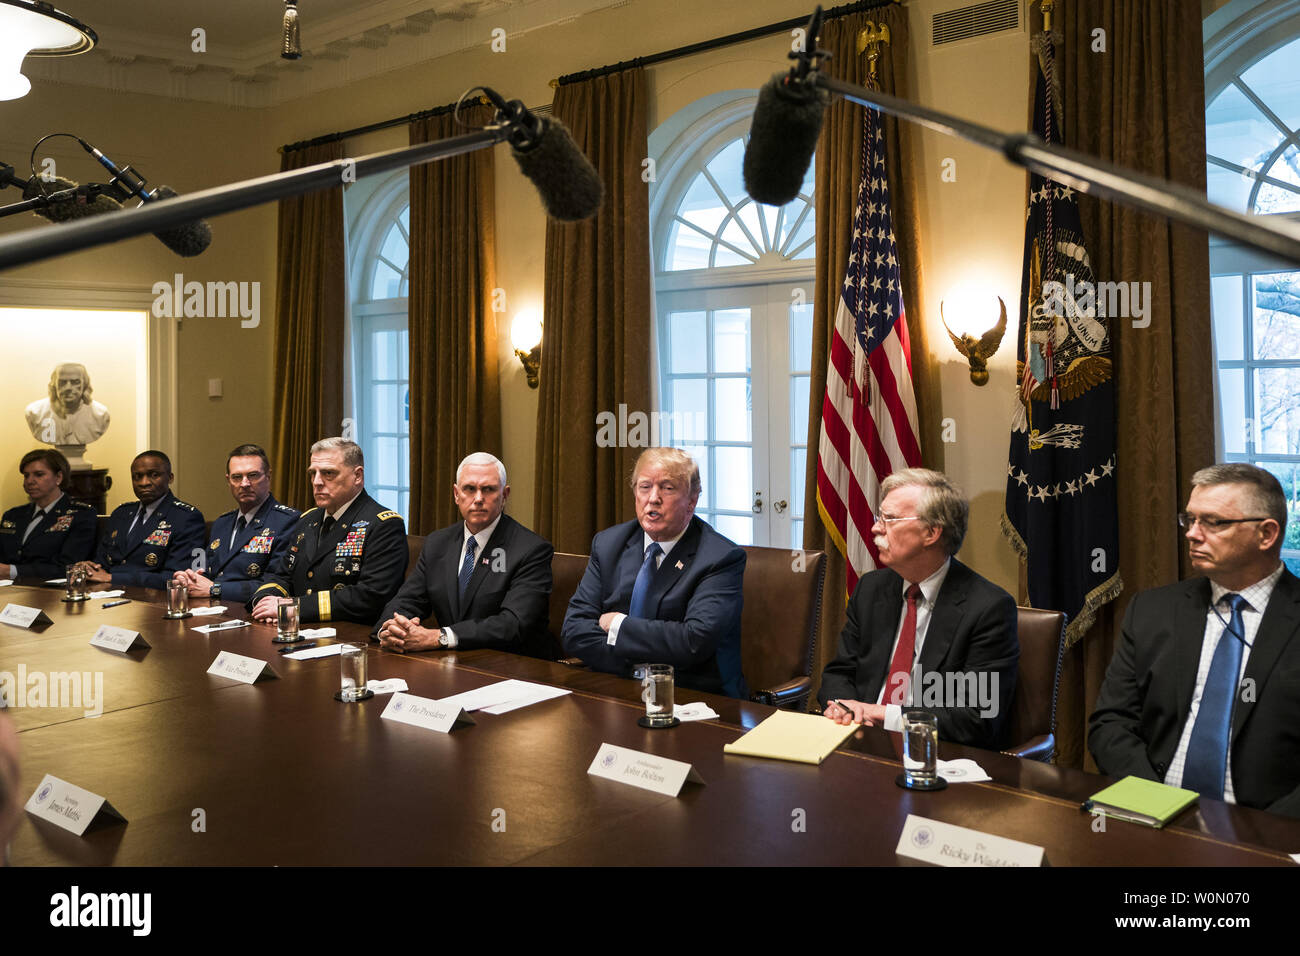 US President Donald J. Trump (C) speaks with the media before a meeting with his military leadership in the Cabinet Room of the White House in Washington DC, on April 9, 2018. Trump said he will decide in the next few days whether the US will respond militarily for the reported chemical weapons attack in Syria. Trump also spoke about the FBI raid of his personal attorney Michael Cohen's office.      Photo by Jim Lo Scalzo/UPI Stock Photo